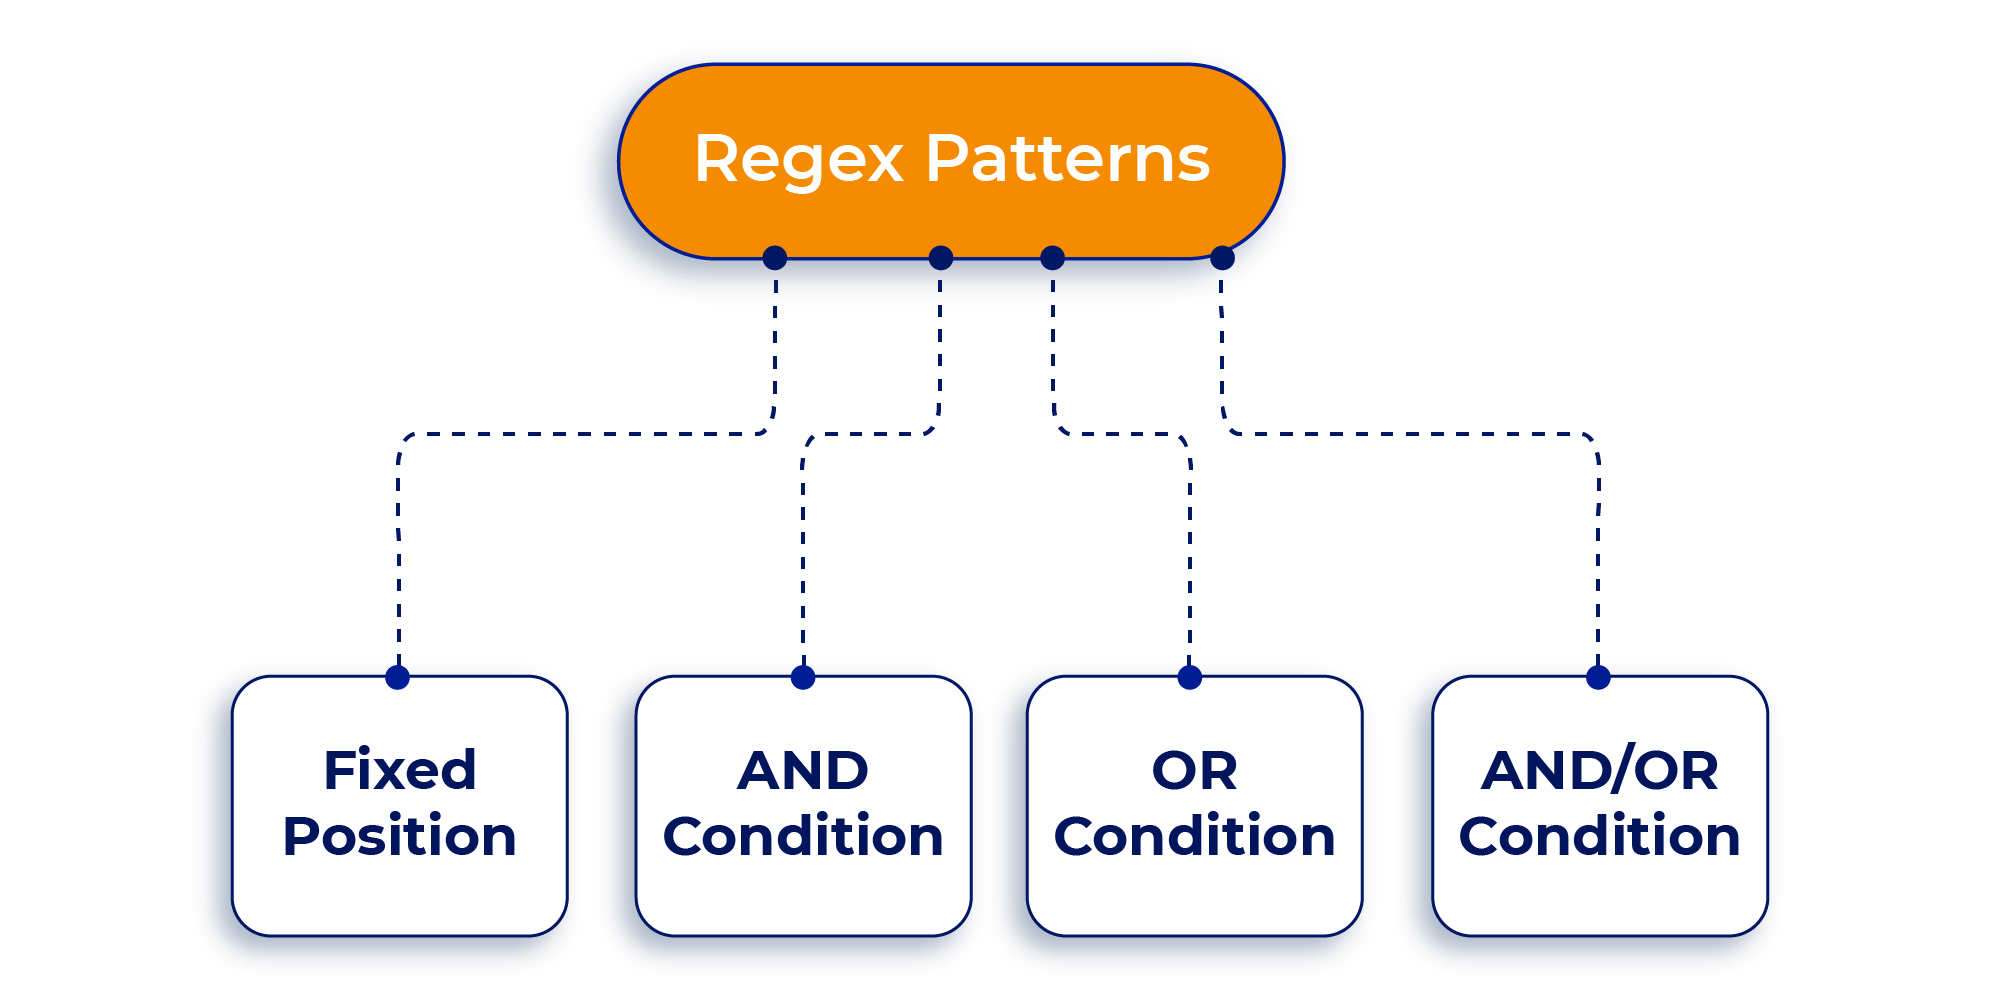 Regex Patterns in Cognitive Search